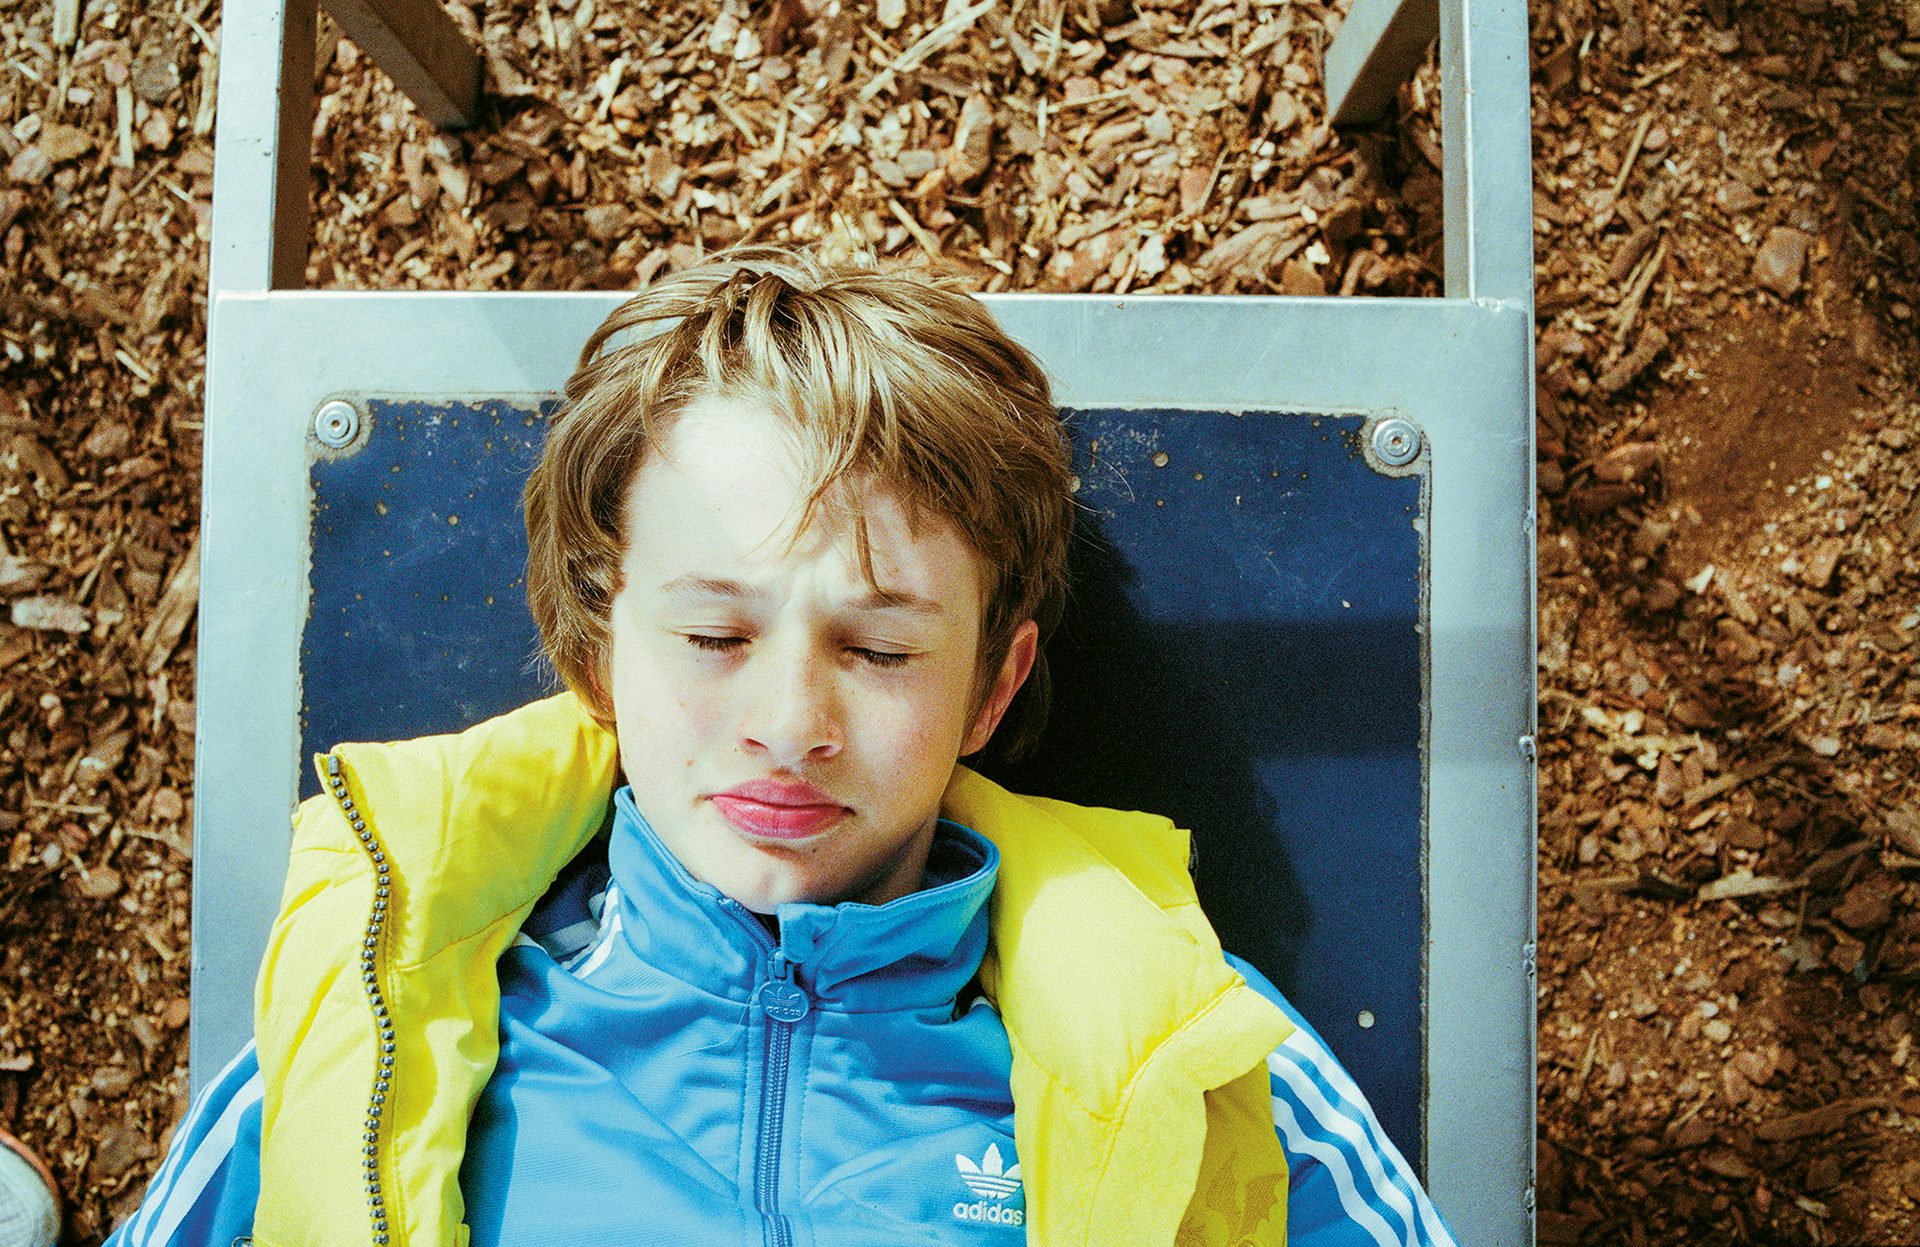 A boy with his eyes closed lying on a bench while wearing a light blue Adidas track jacket and a bright yellow vest over the top